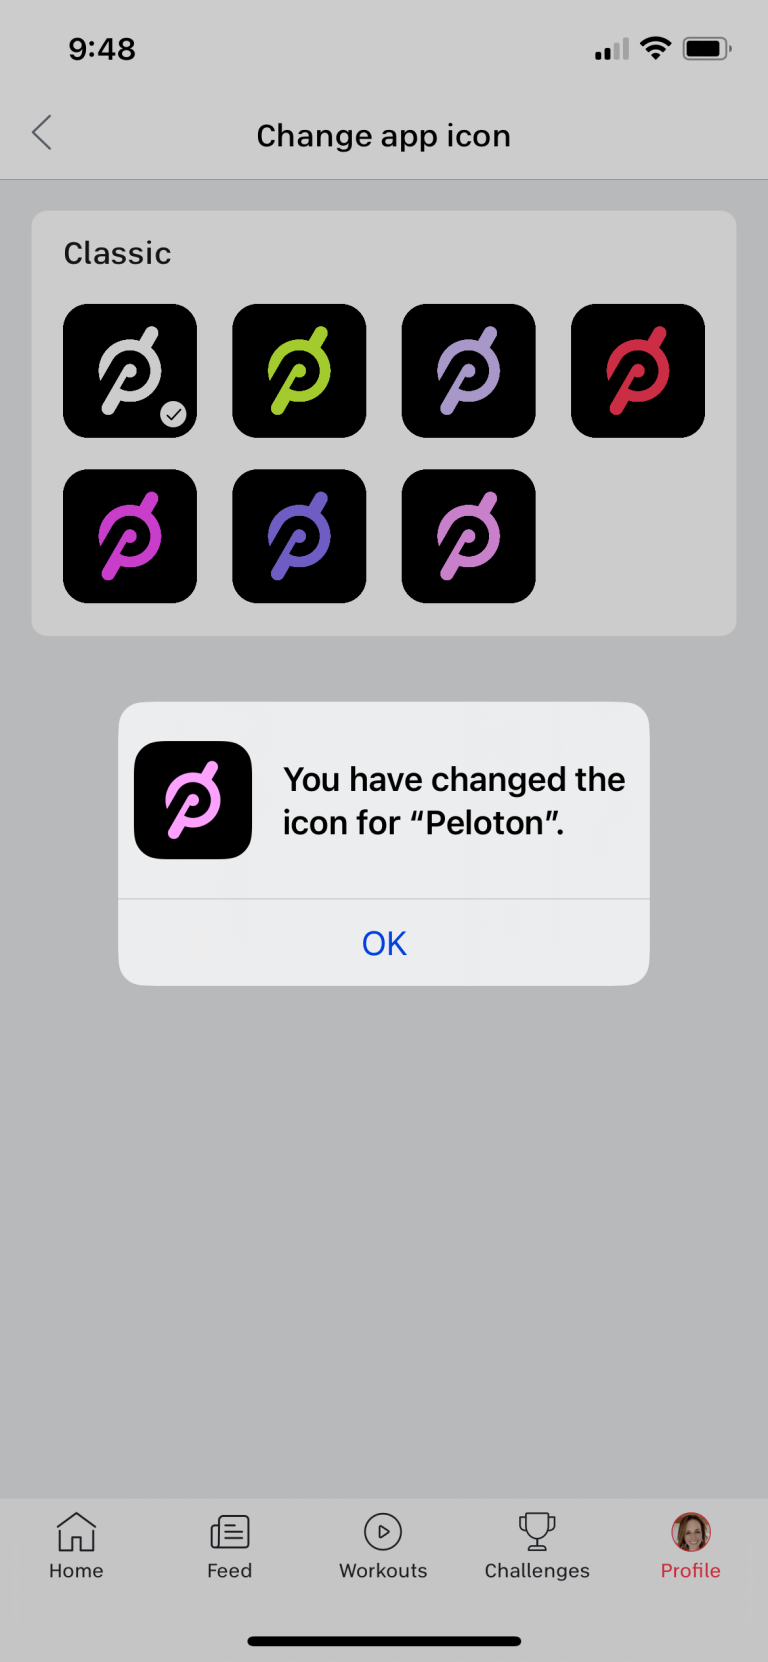 How to Change the Peloton App Icon on Your iPhone